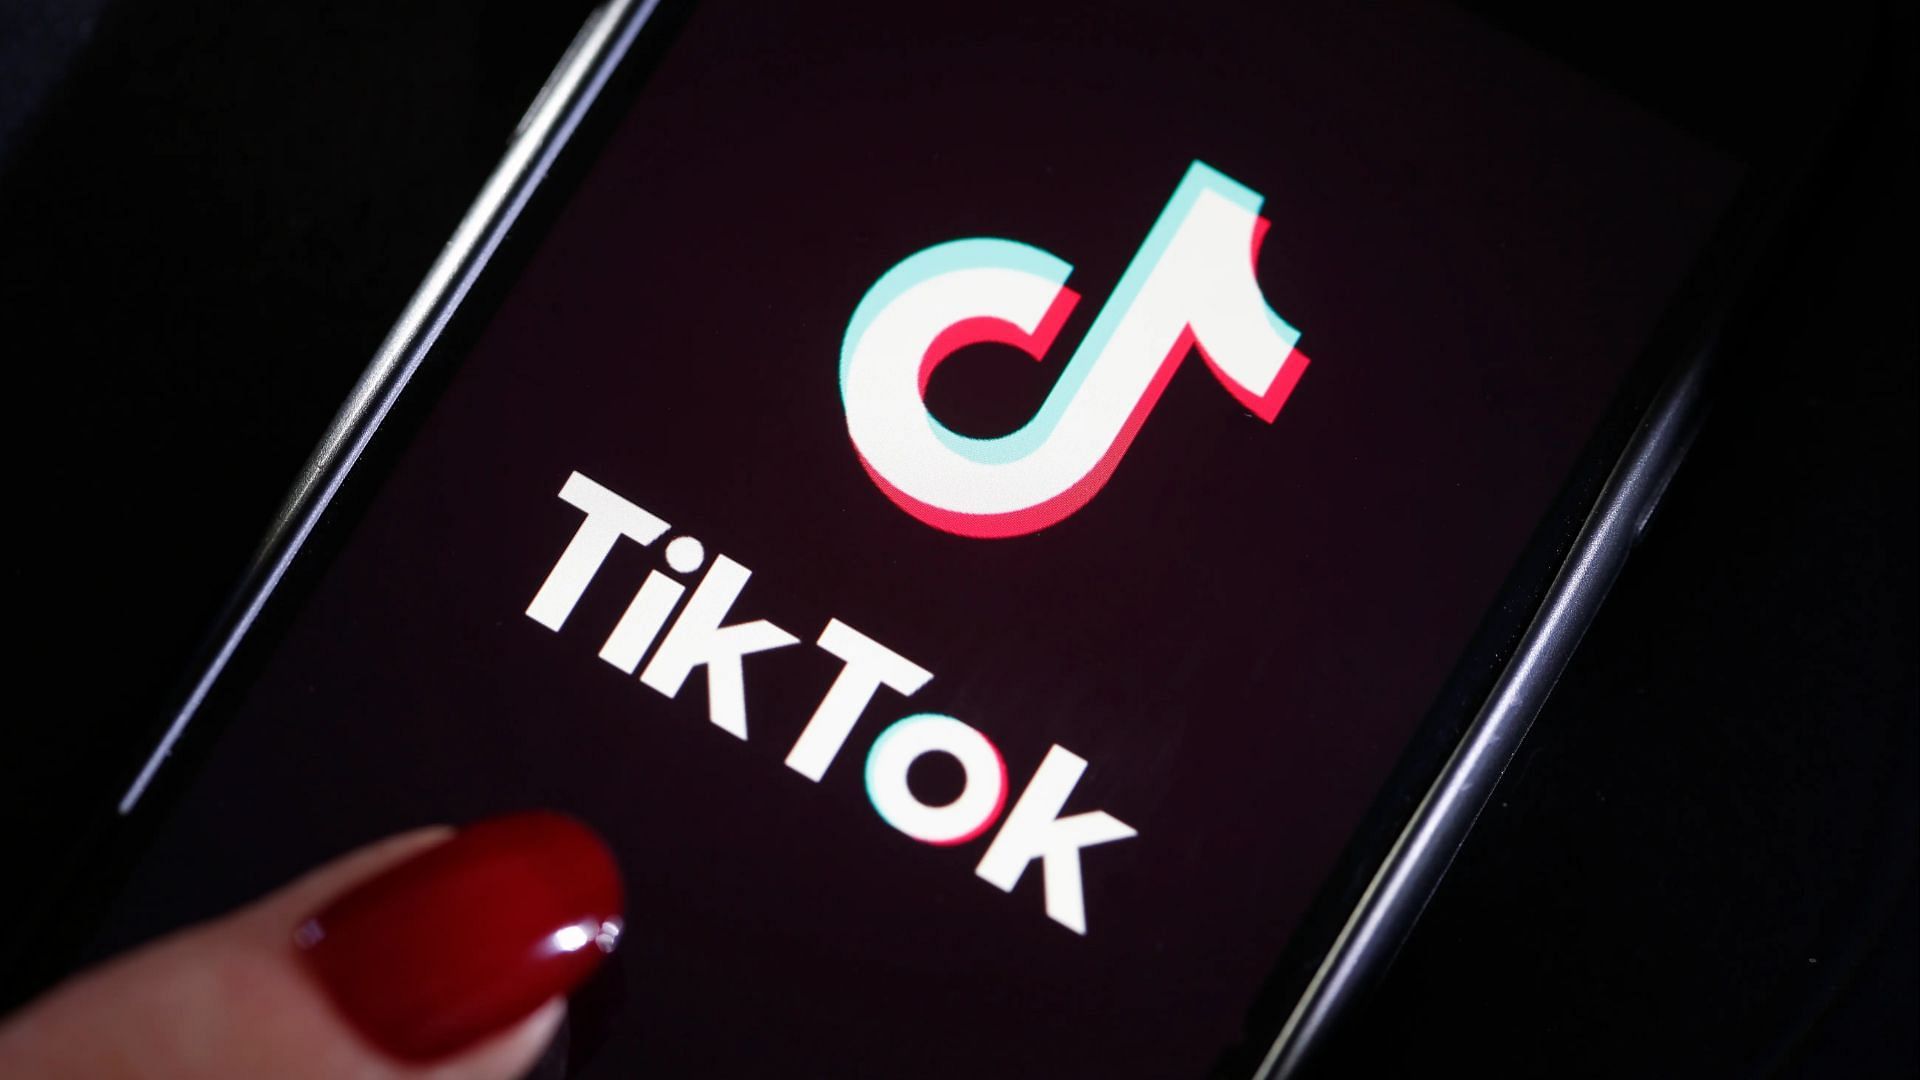 Rose gift on the TikTok live stream feature is one of the cheapest gifts. (Image via Shutterstock)